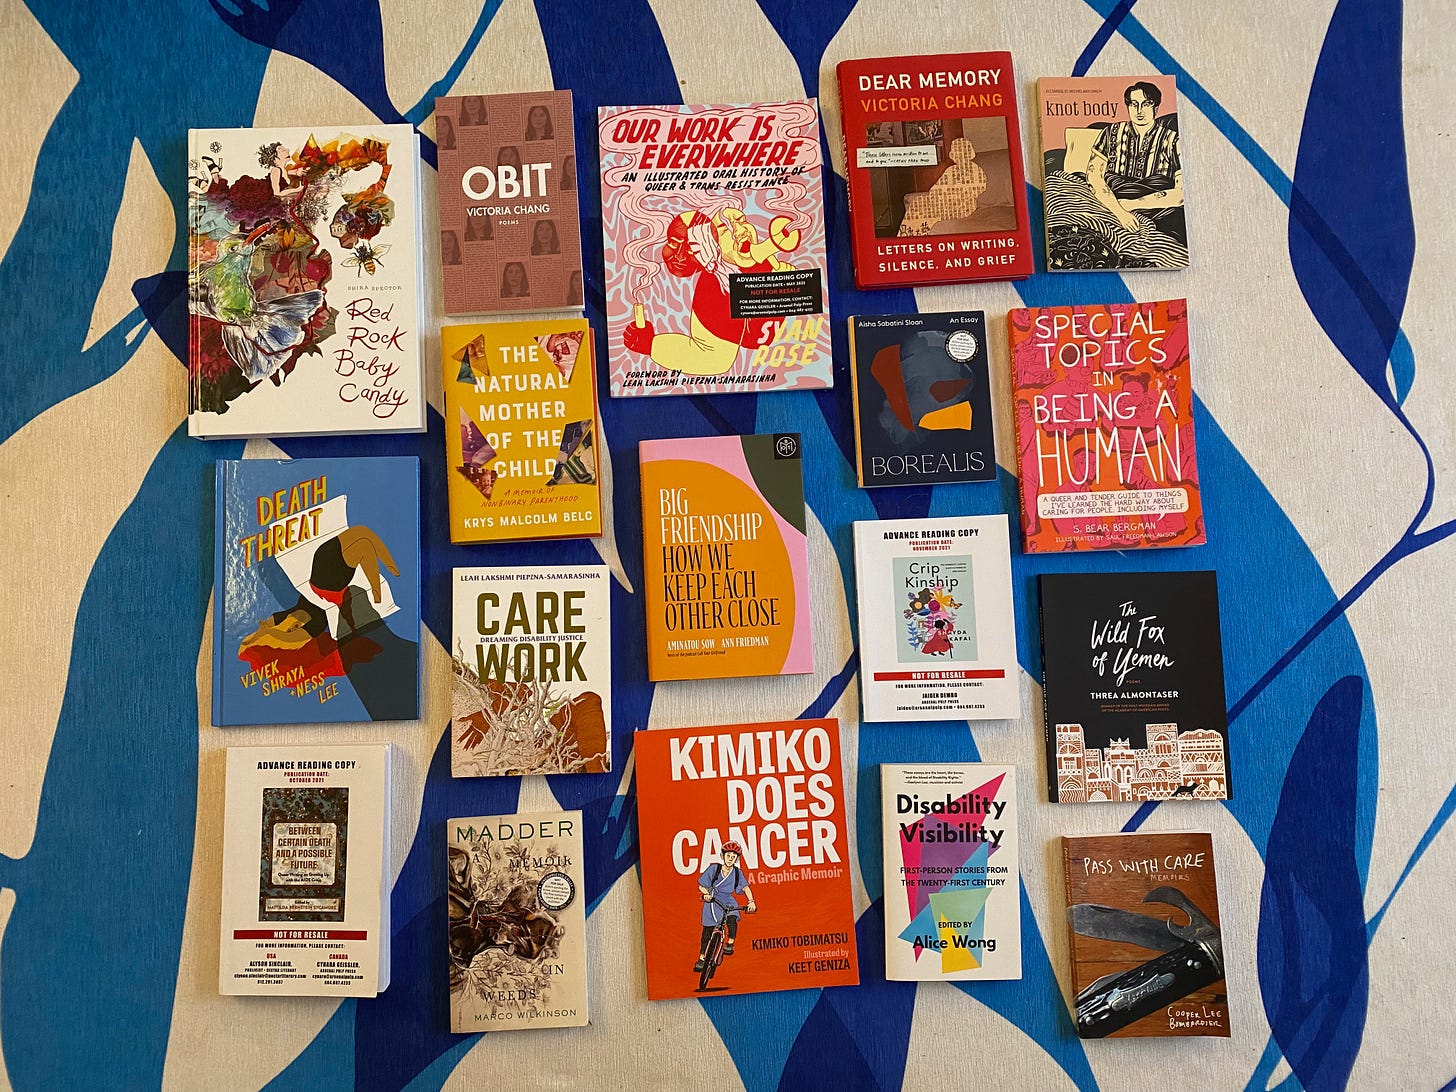 A selection of the books listed below laid out on a blue and white patterned rug.